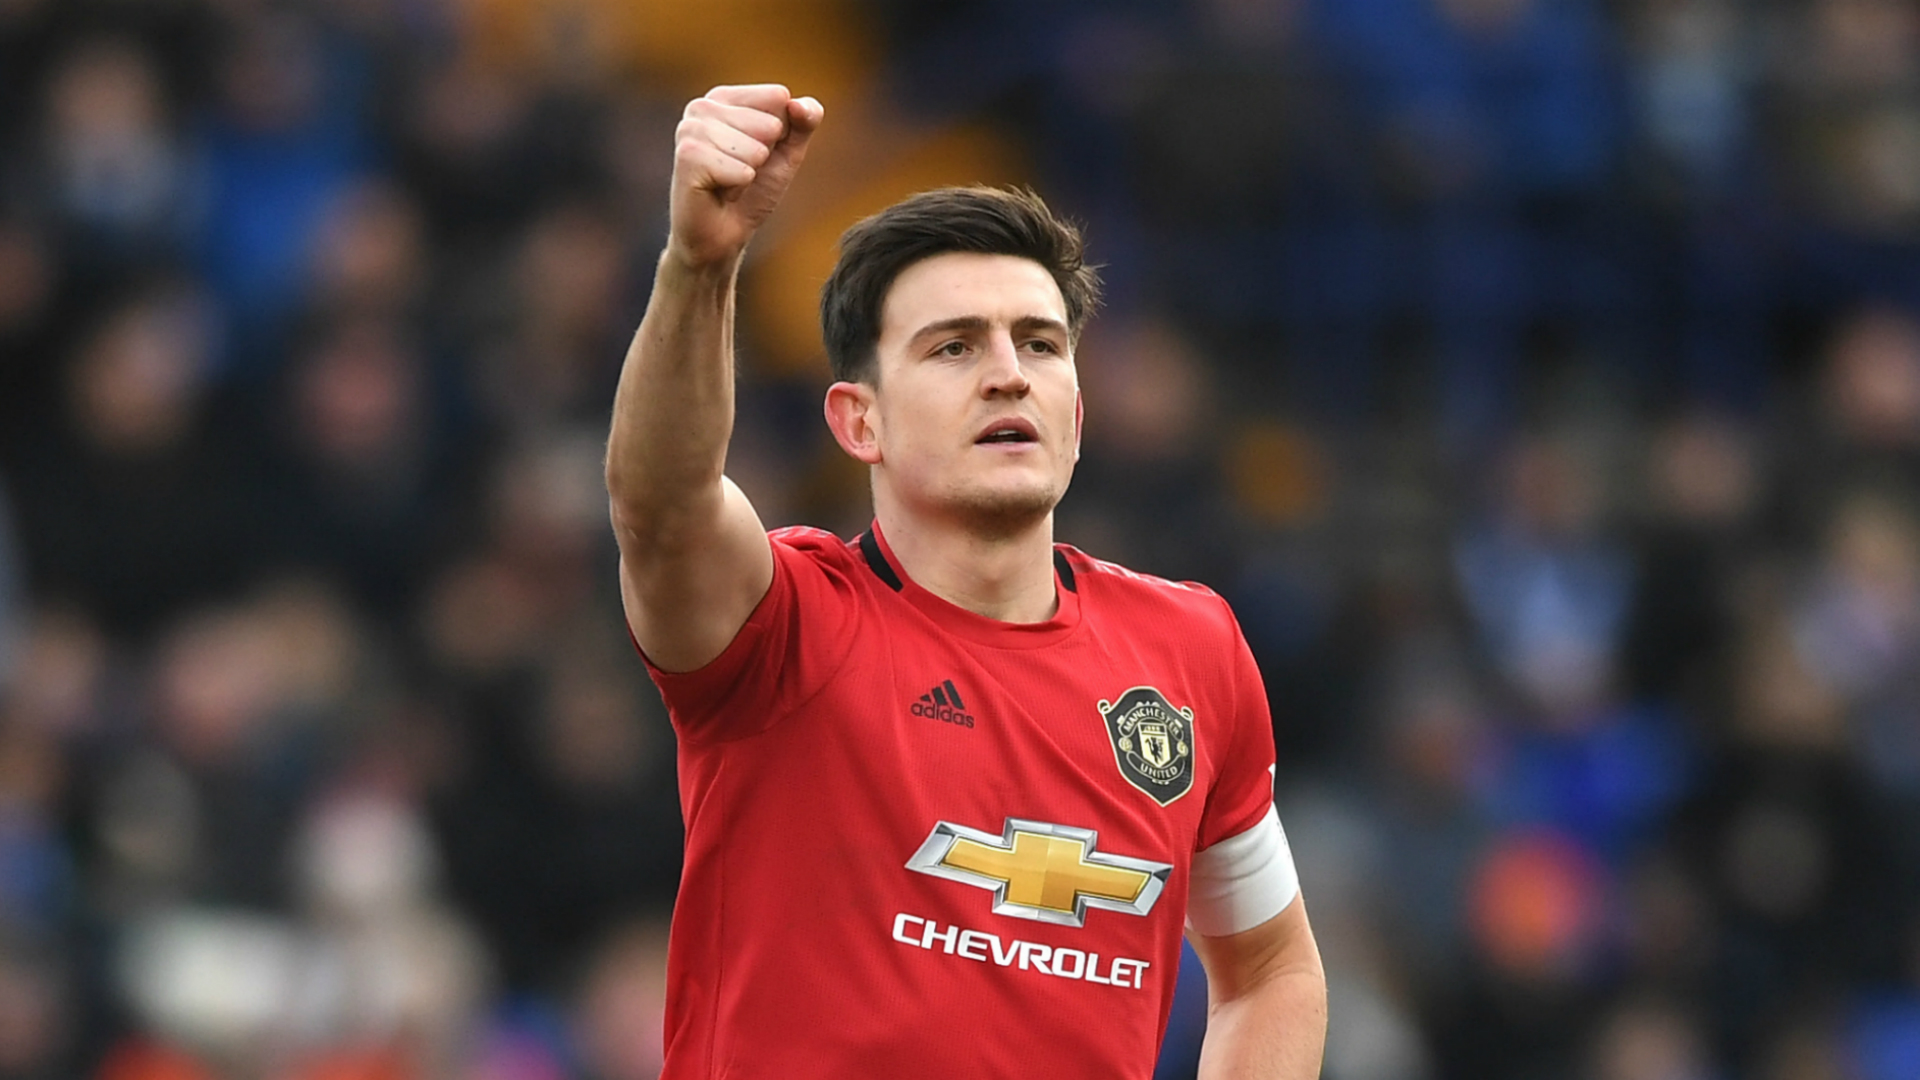 Defenders Harry Maguire and Phil Jones both got on the scoresheet as Manchester United beat Tranmere Rovers 6-0 in the FA Cup fourth round.